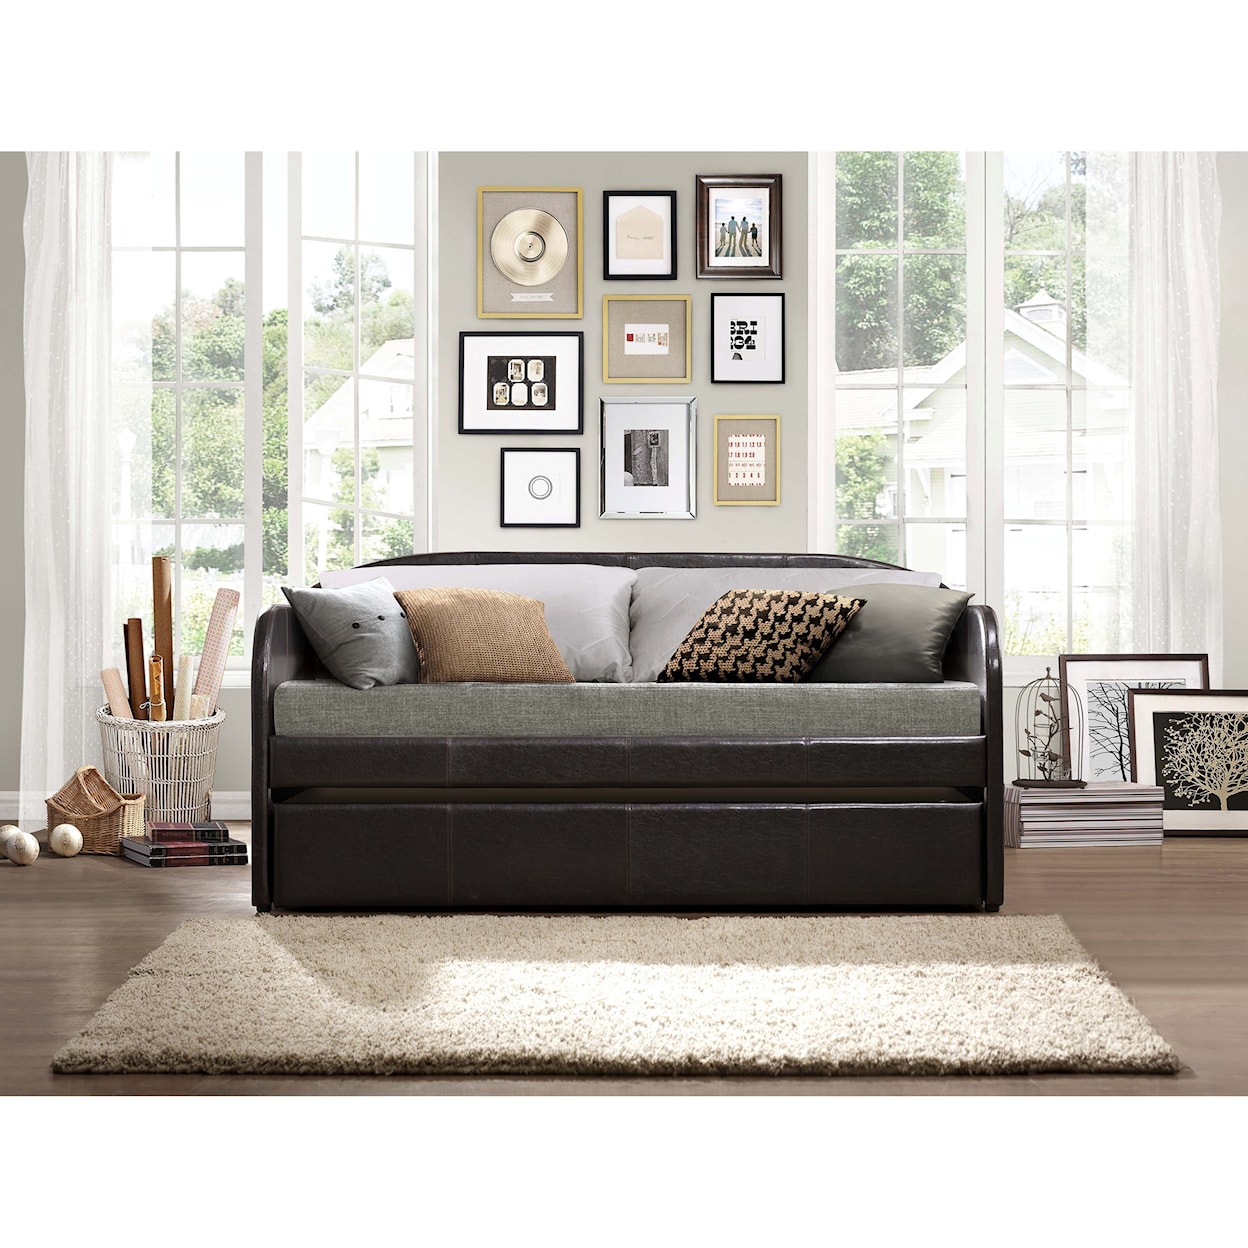 Homelegance Furniture Daybeds Roland Daybed with Trundle